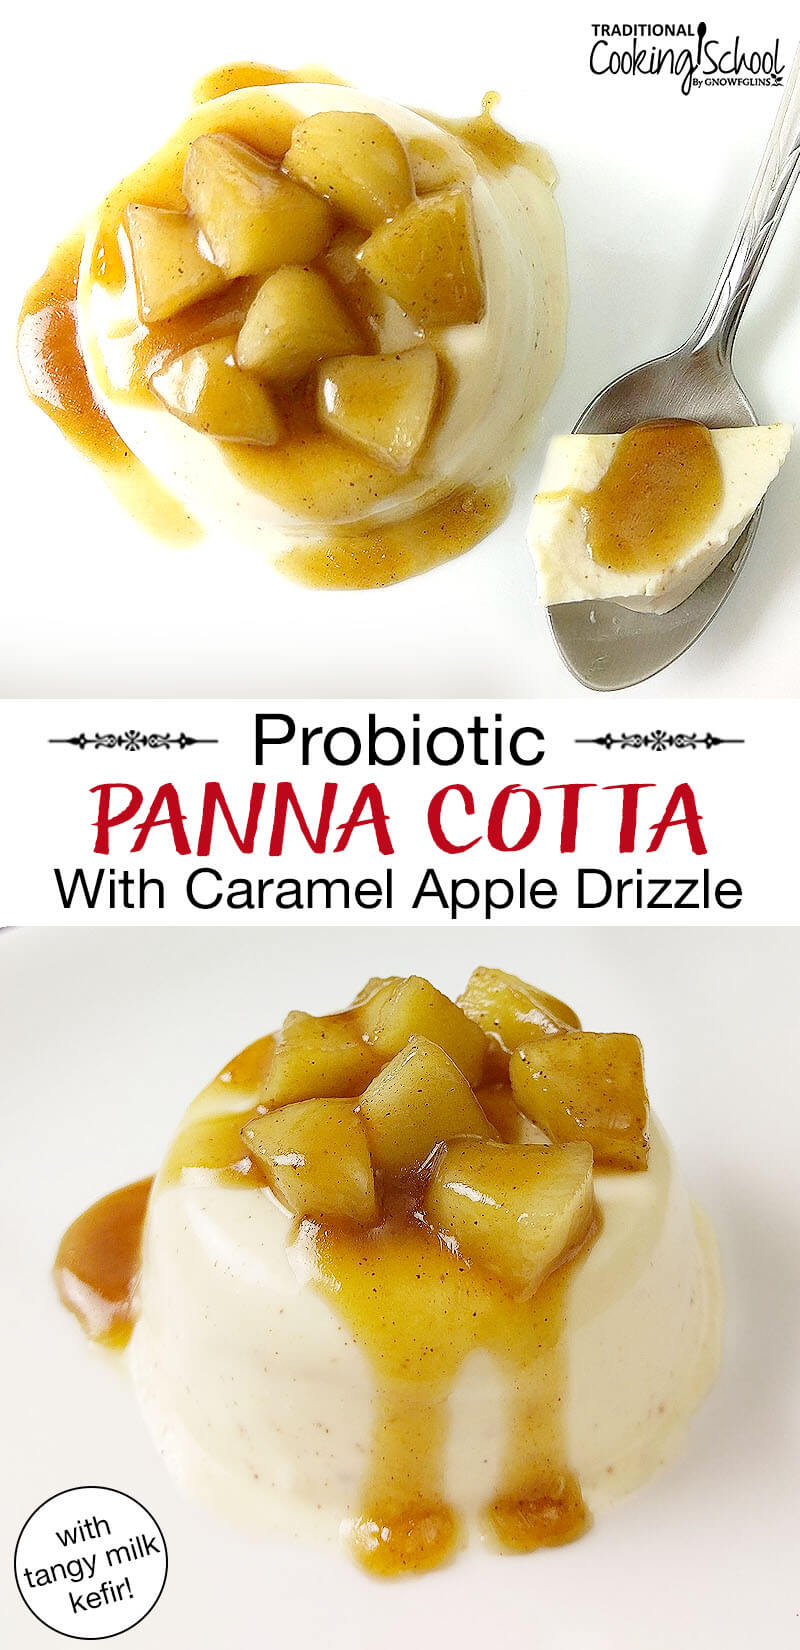 Photo collage of panna cotta topped with sauteed apple chunks and a caramel sauce. Text overlay says: "Probiotic Panna Cotta With Caramel Apple Drizzle (with tangy milk kefir!)"